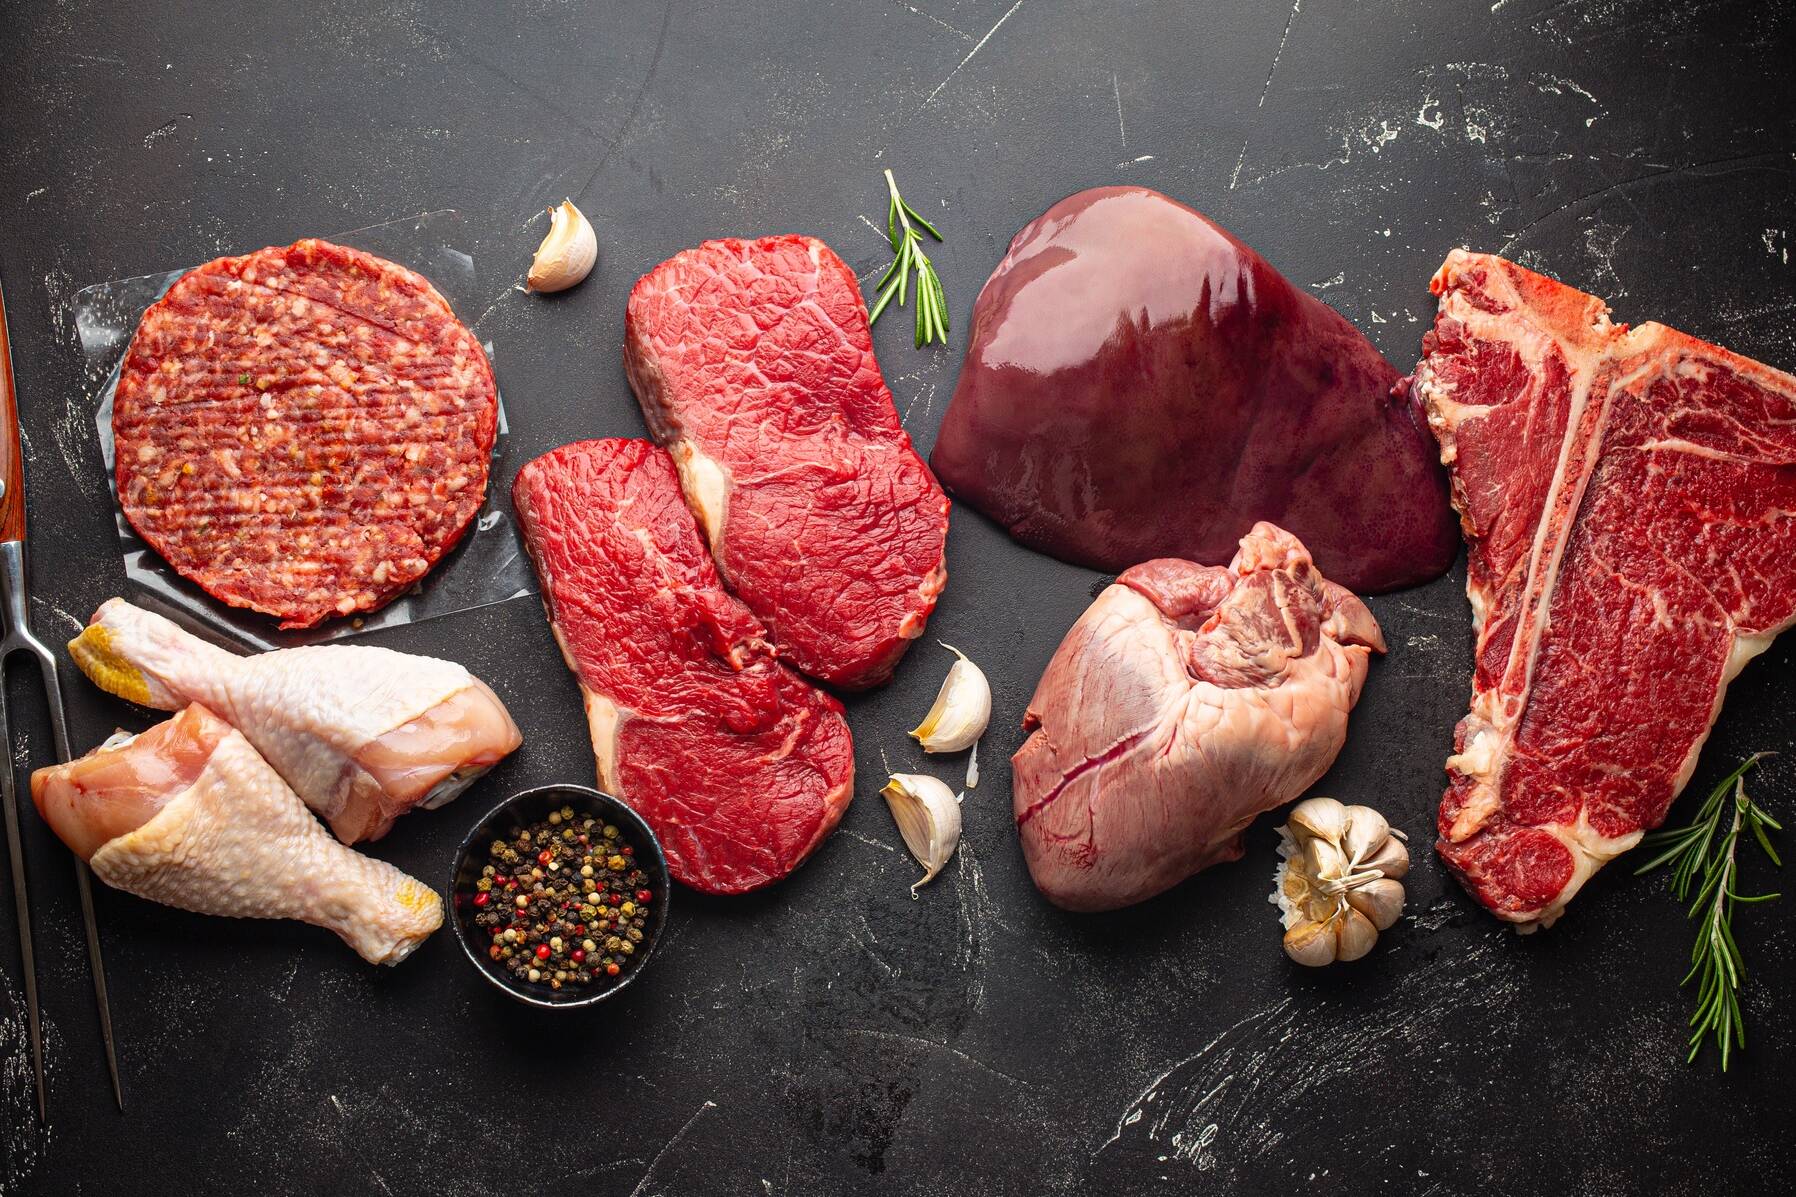 Eating red meat extends your life, scientists say | Farm Online | Farmonline